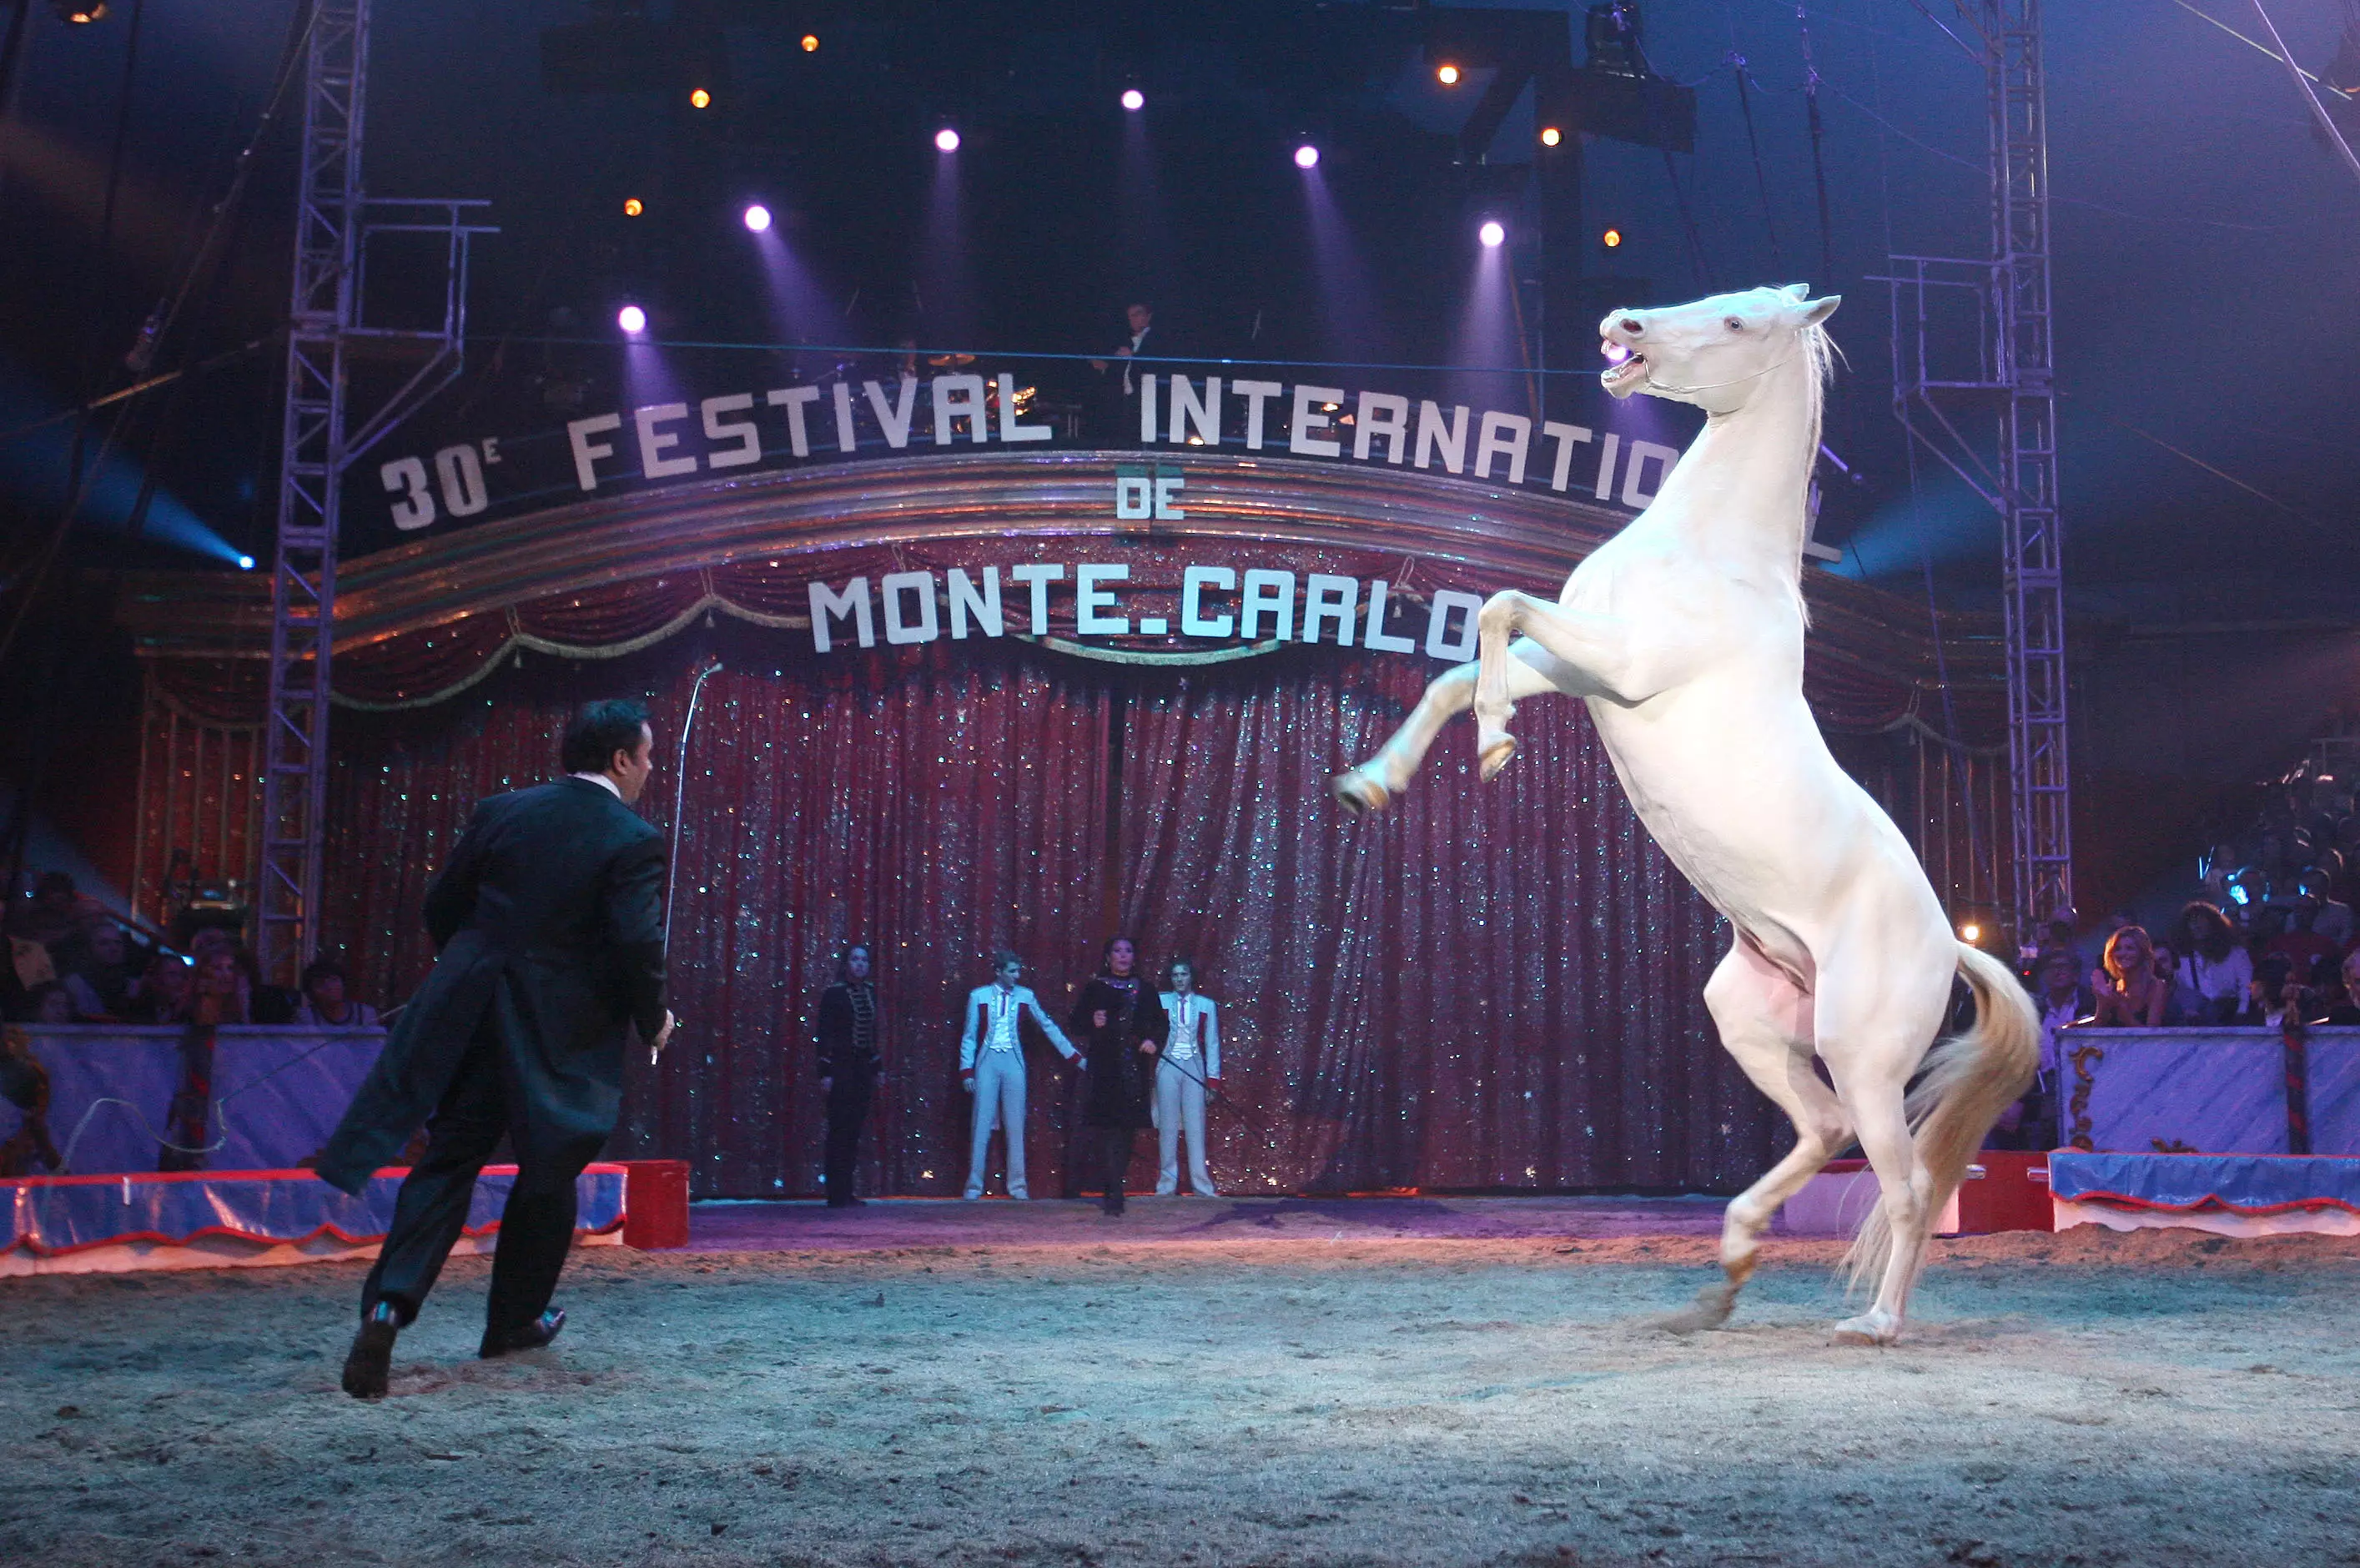 Artists perform at the opening of the 30th Monte Carlo Circus Festival in Monaco.